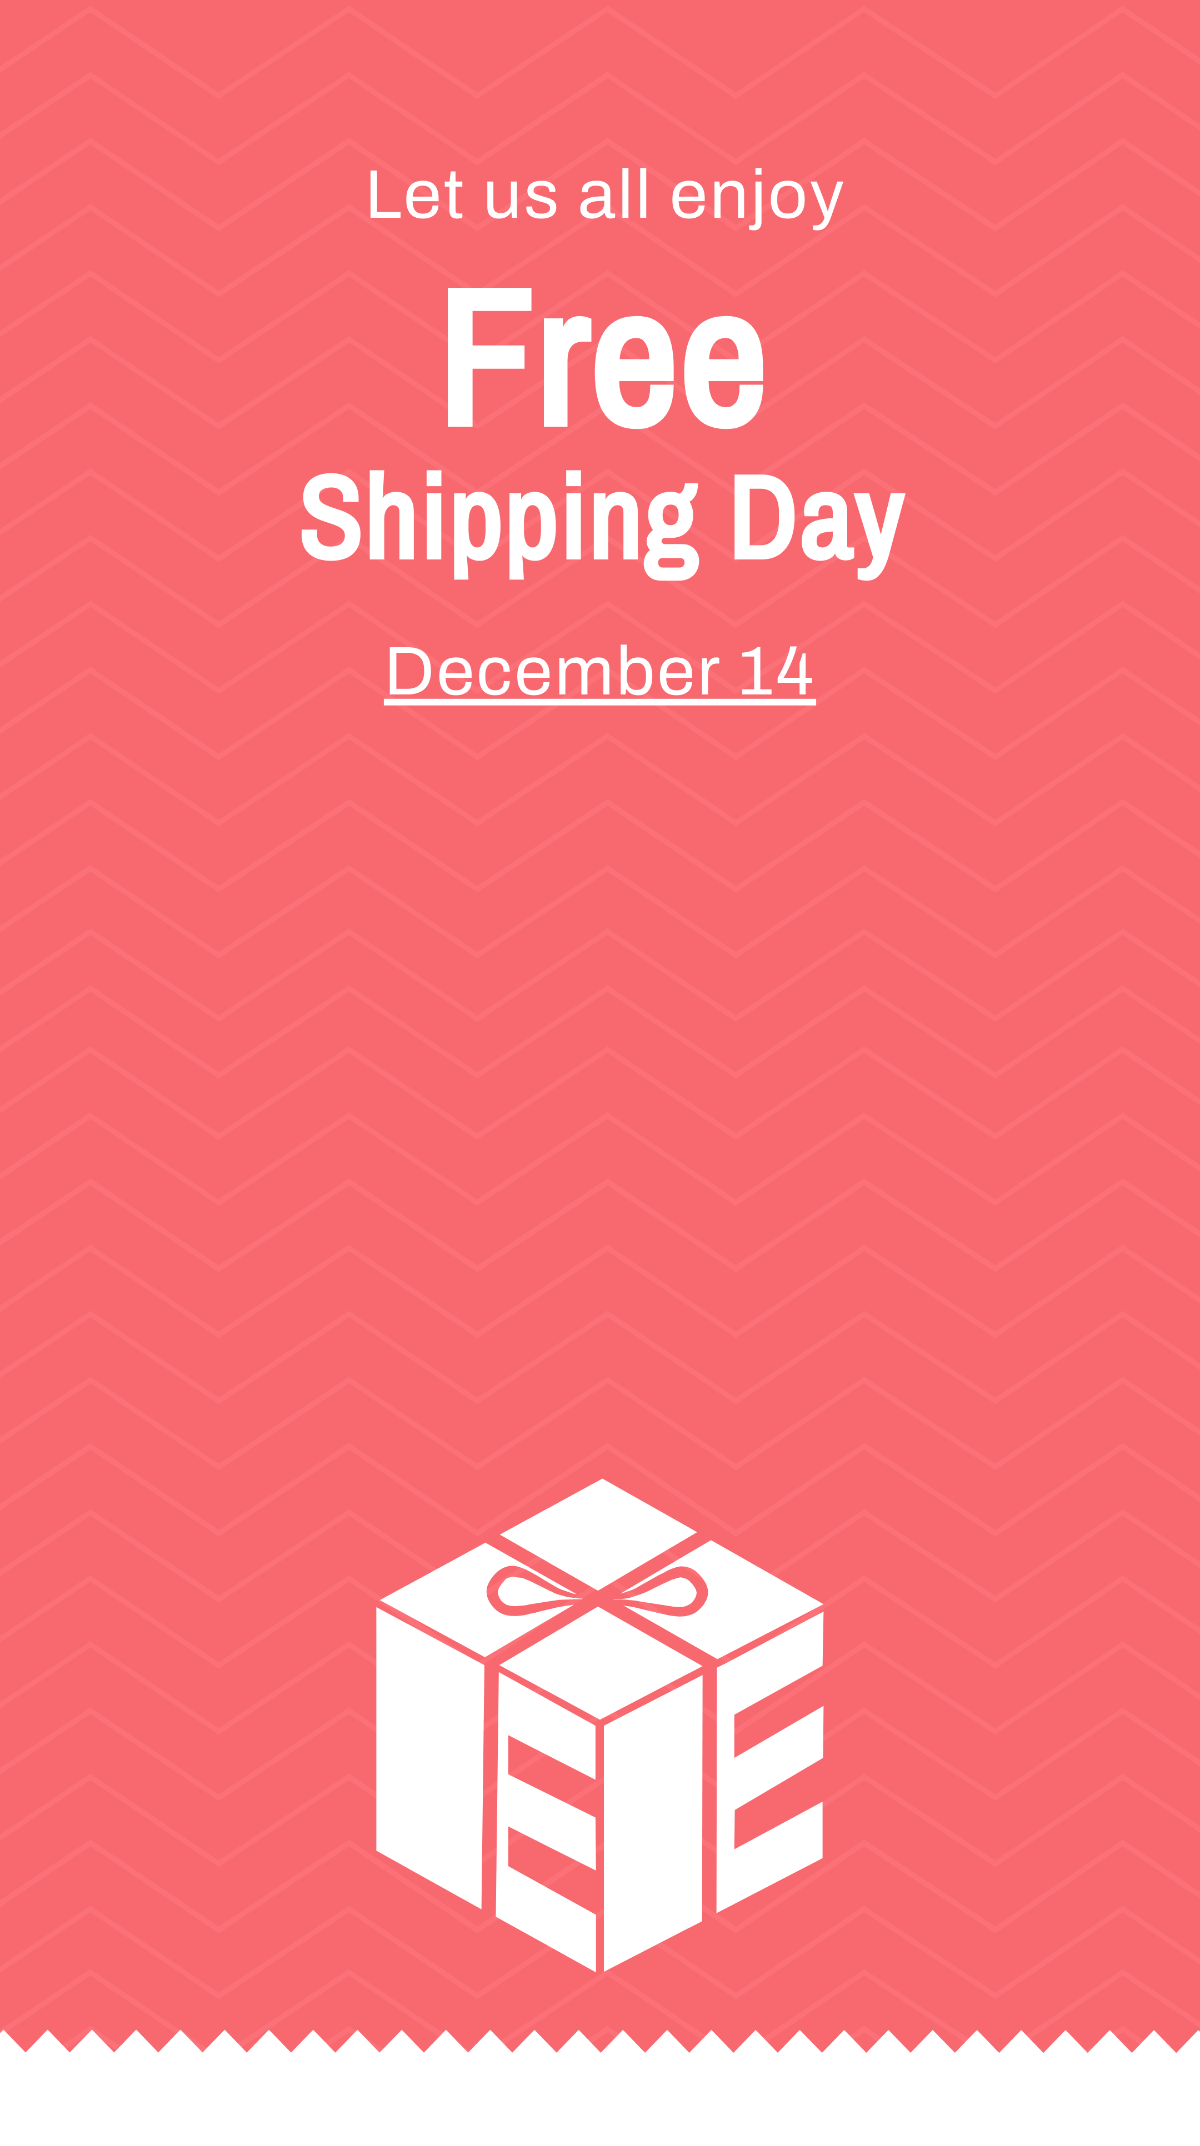 Free Shipping Day Snapchat Geofilter Template